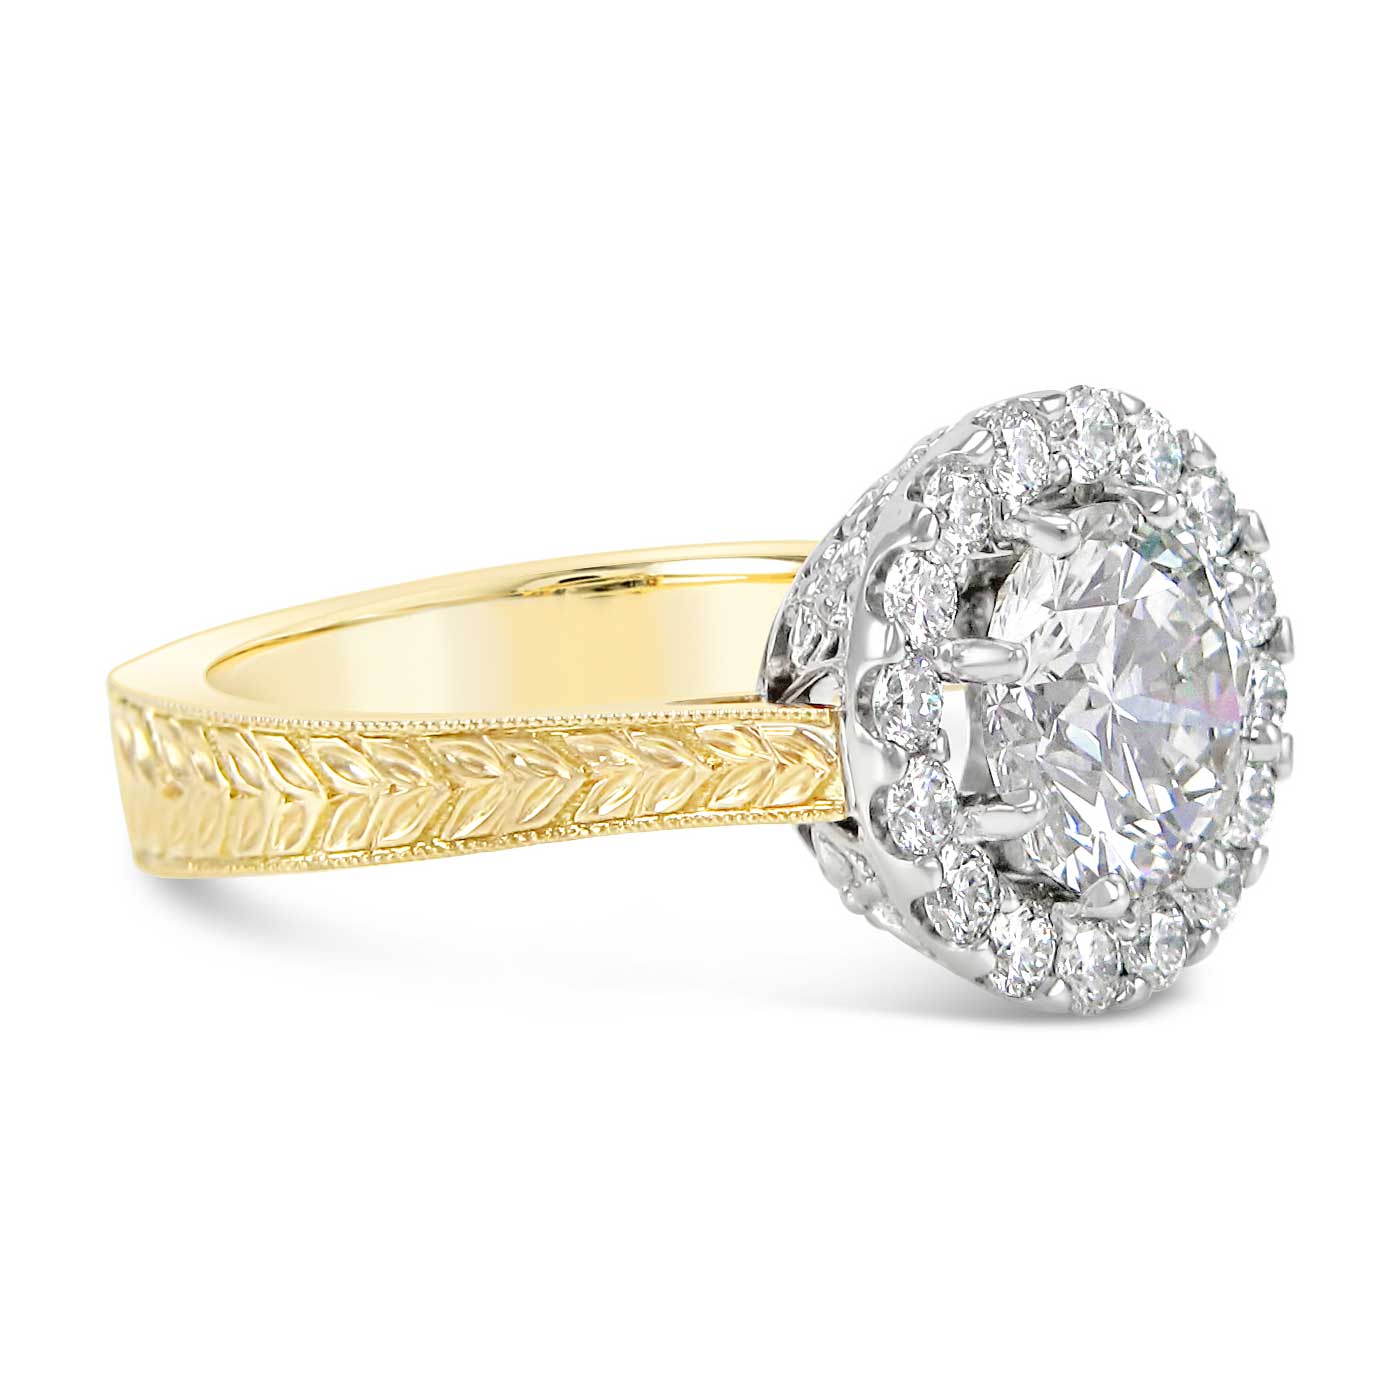 Vintage inspired 19k white and 18k yellow gold engagement ring set with a 2ct center stone and a diamond halo